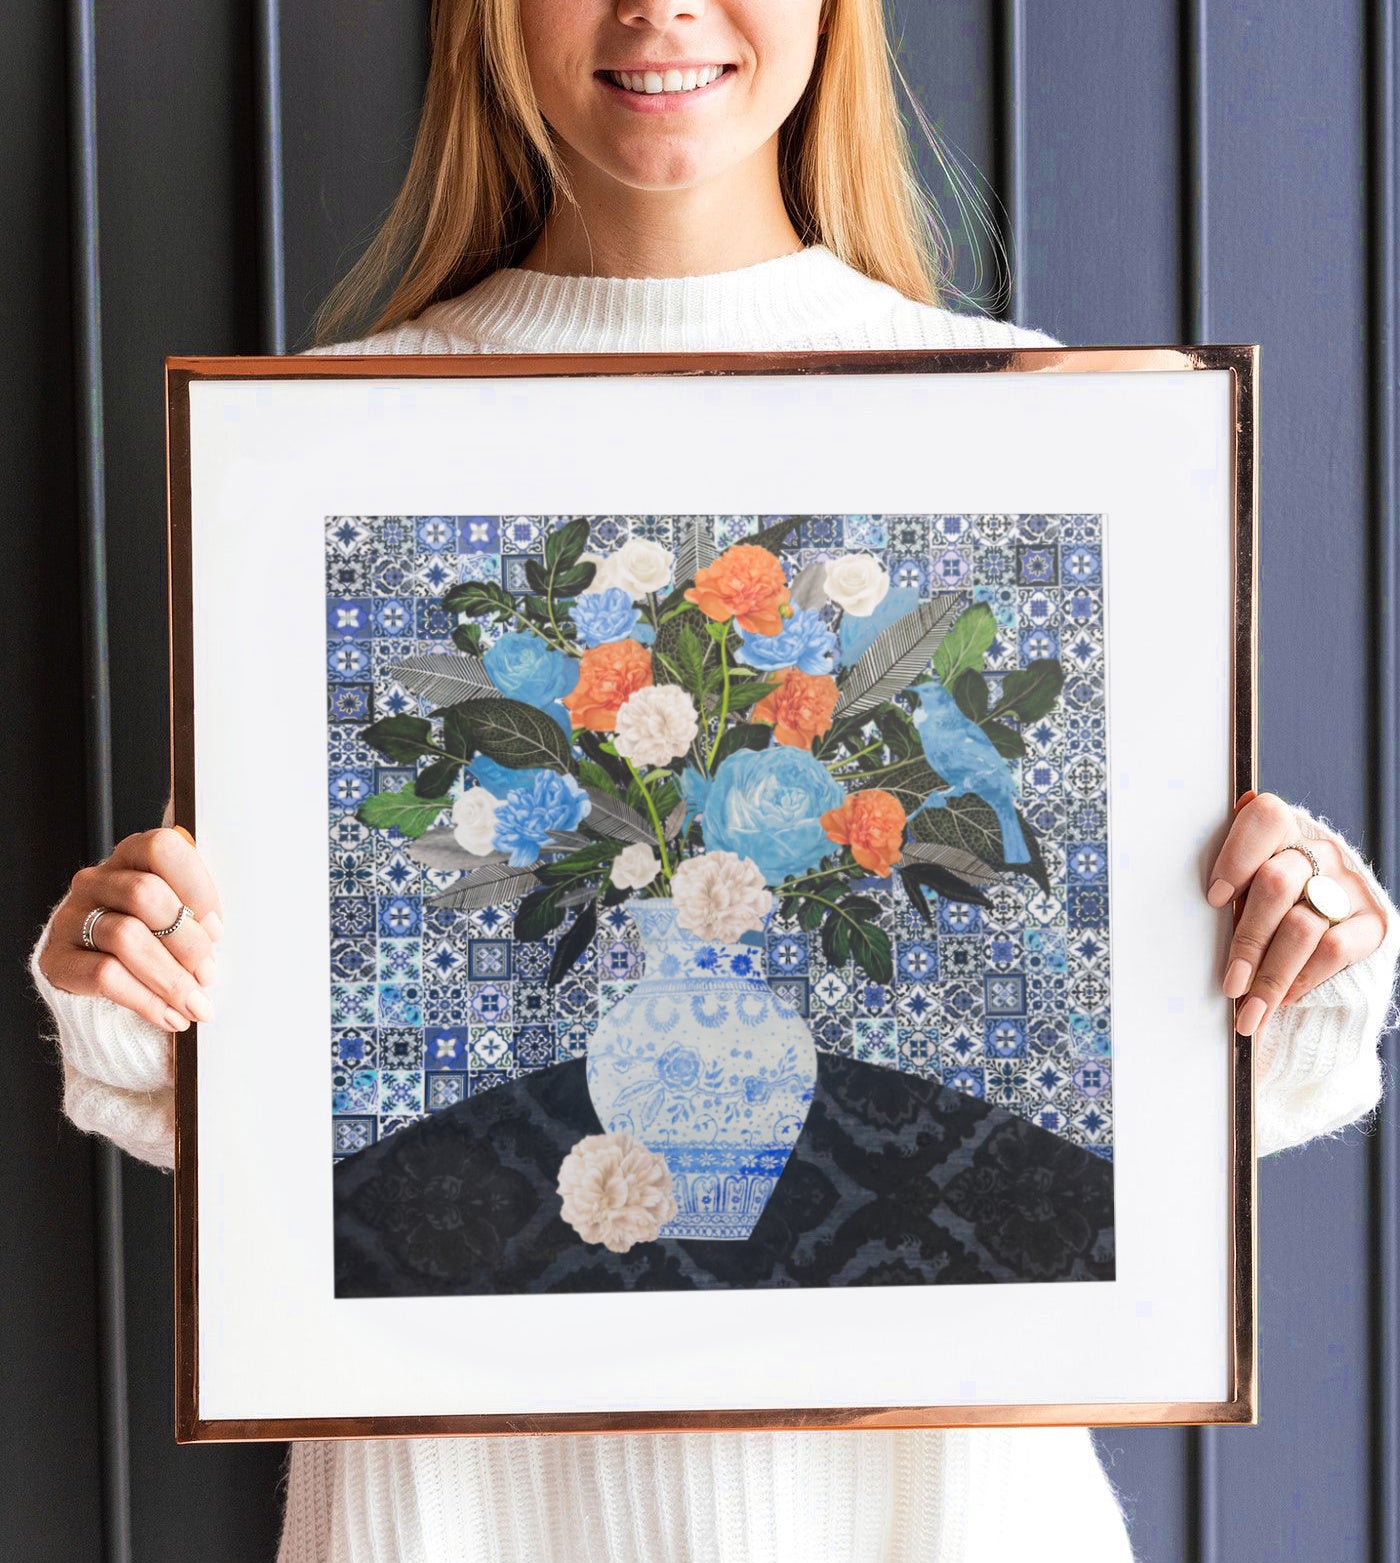 The farewell flowers limited edition print